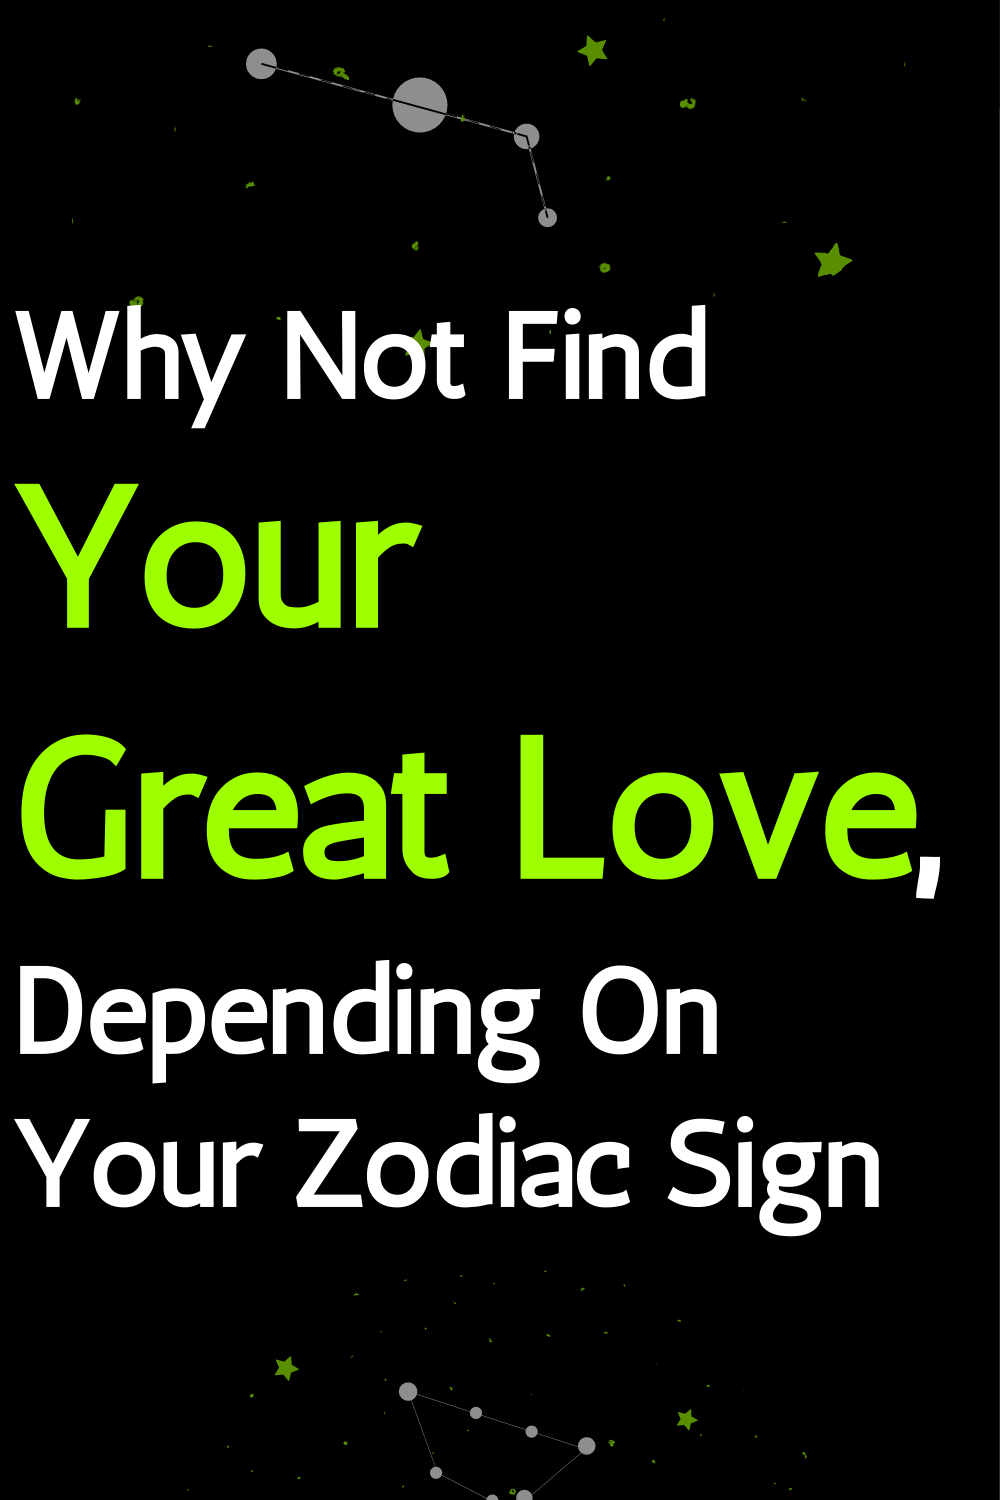 Why Not Find Your Great Love, Depending On Your Zodiac Sign